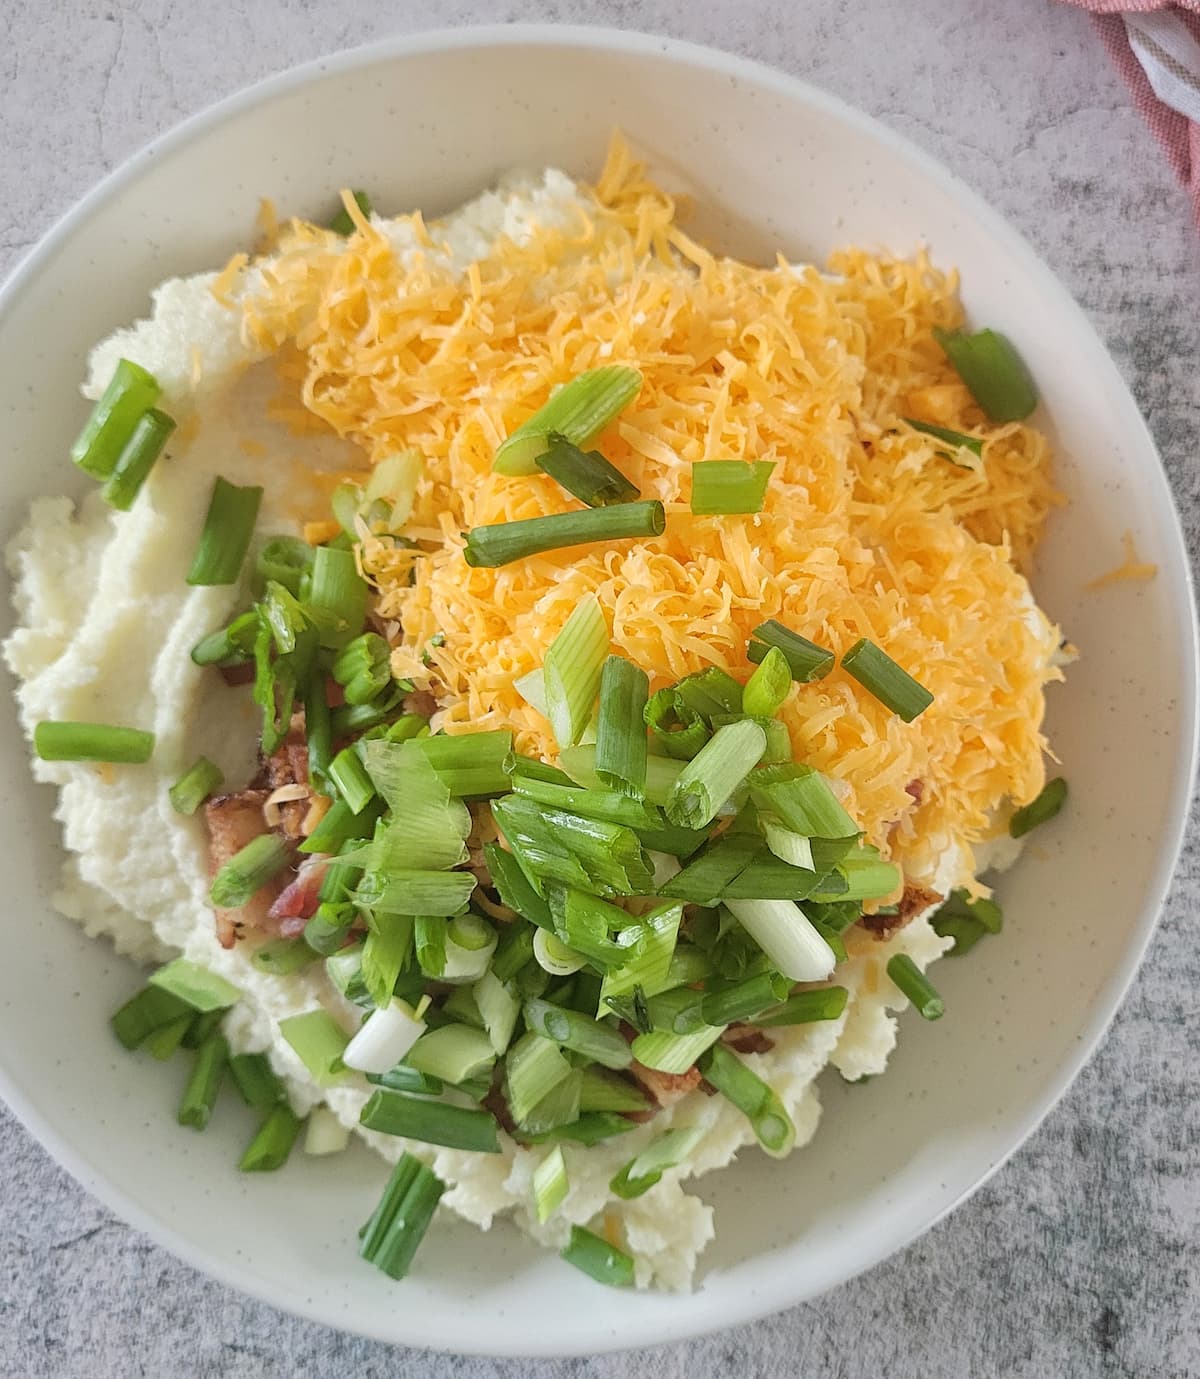 chopped green onions, shredded cheddar, bacon bits on top of a pile of mashed cauliflower